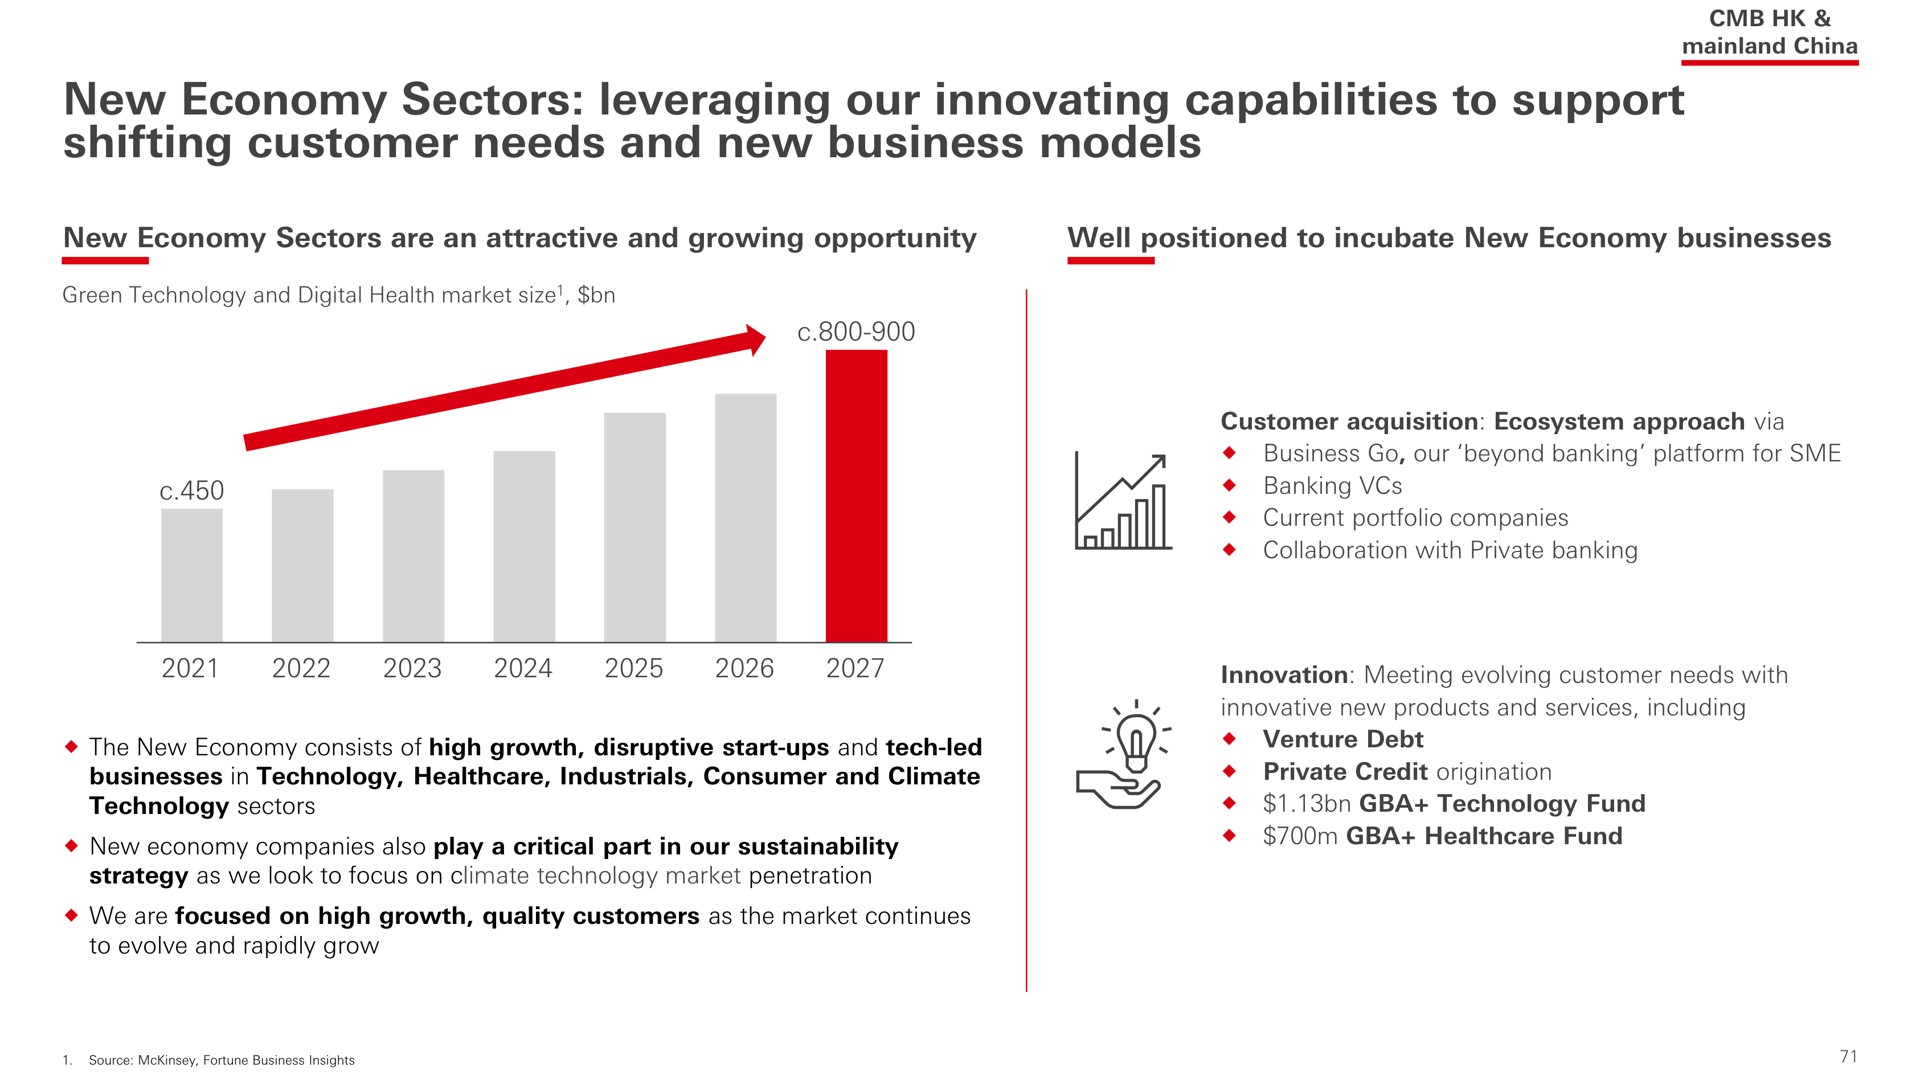 new economy sectors leveraging our innovating capabilities to support shifting customer needs and new business models | HSBC